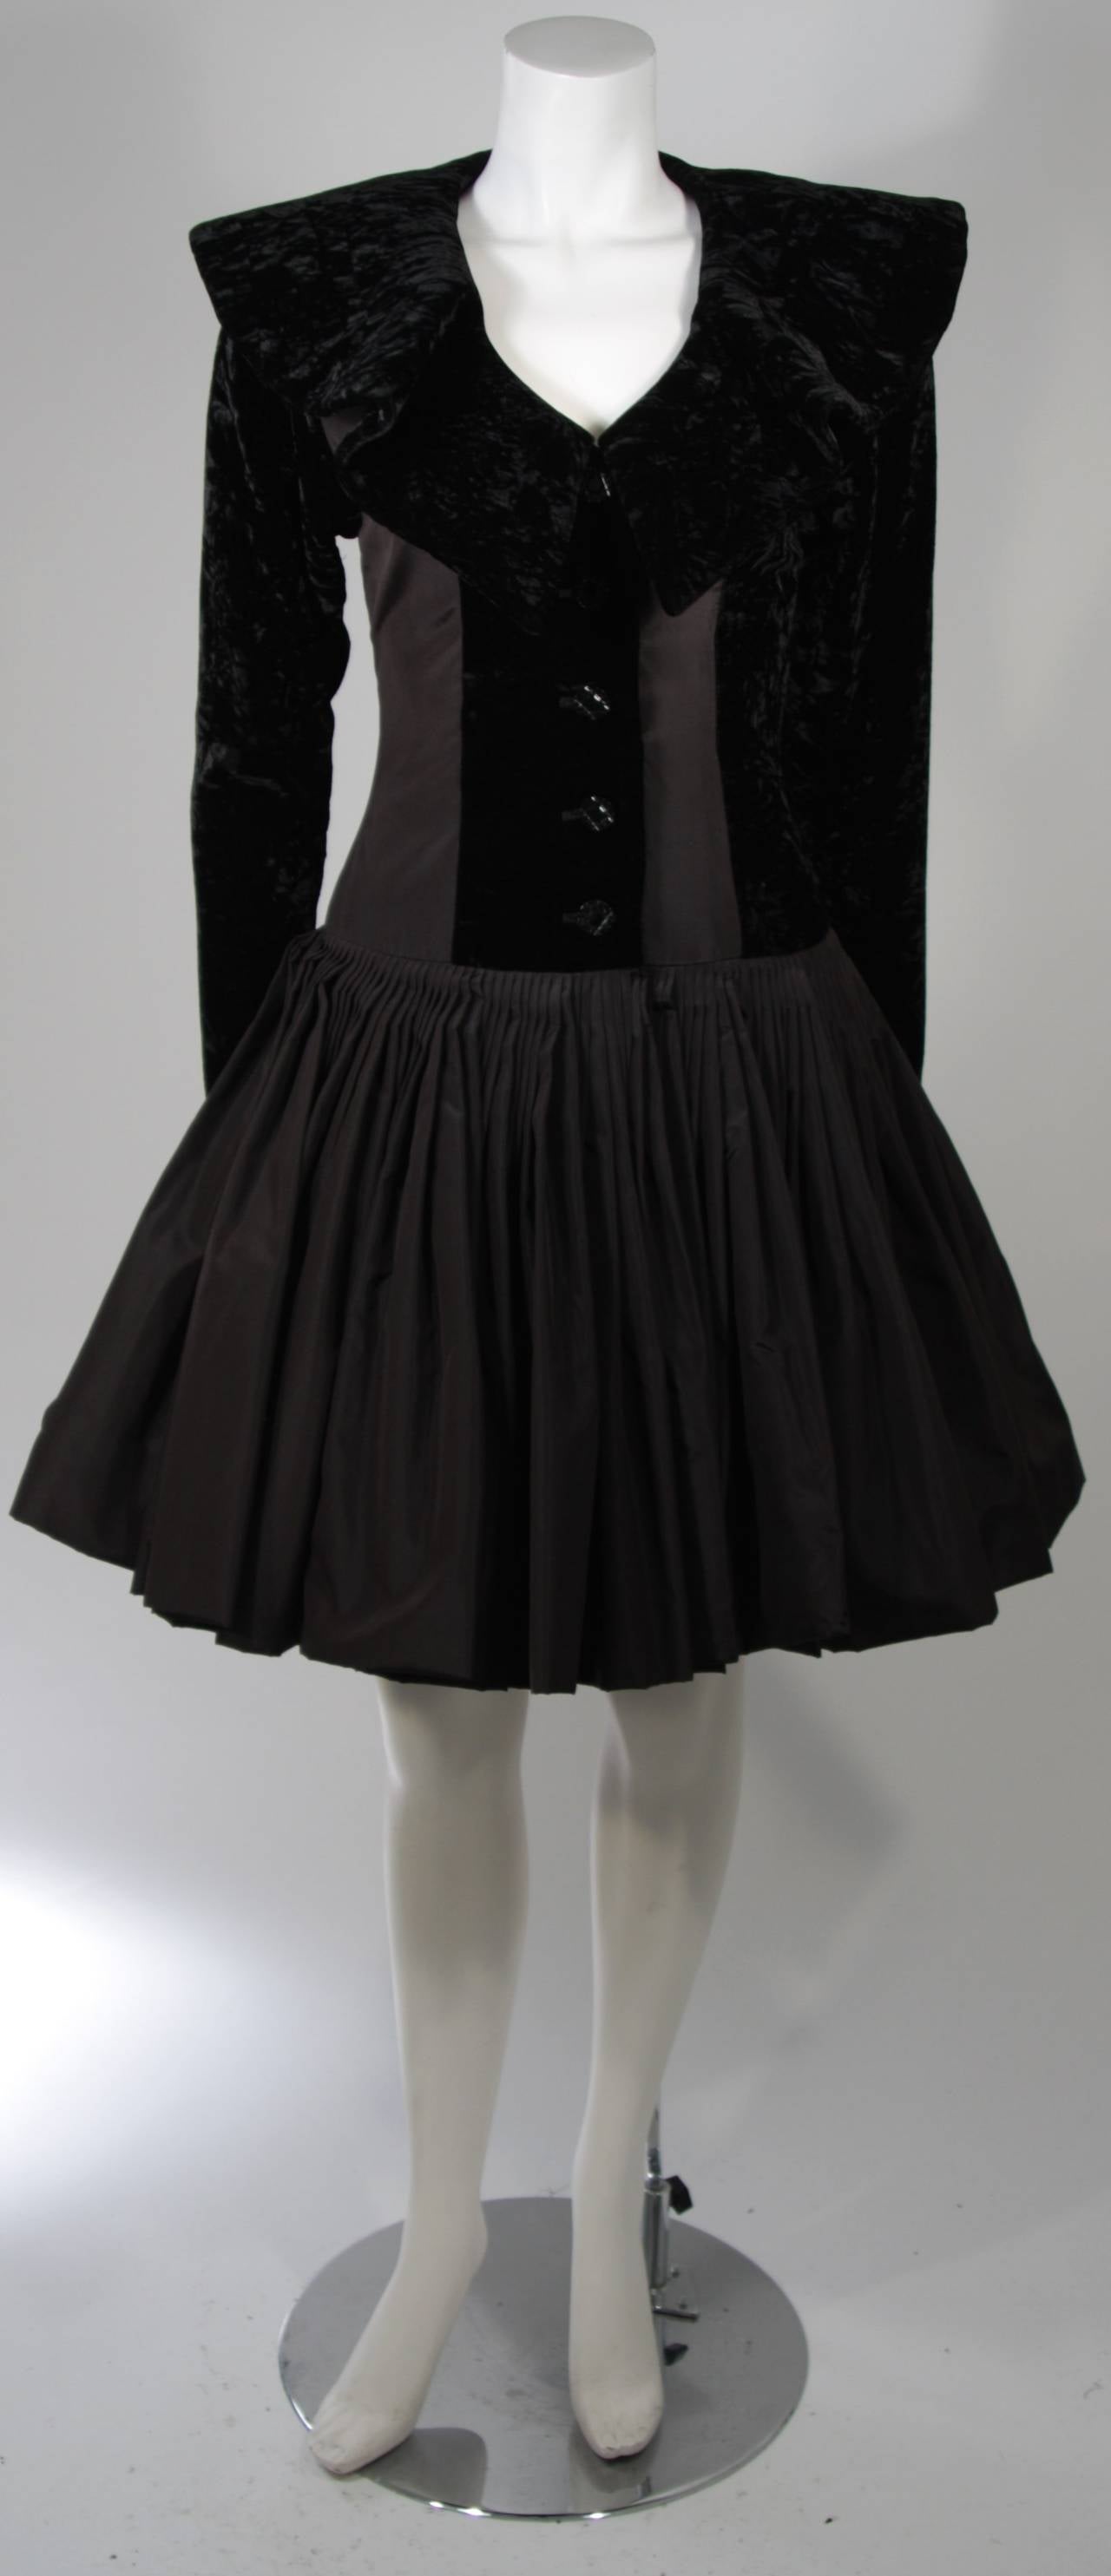 This wonderful Galanos Design is available for viewing at our Beverly Hills Boutique. The dress is fashioned out of black silk and velvet. The large and dramatic collar is accented by a flattering full gathered skirt. There are center front snap and